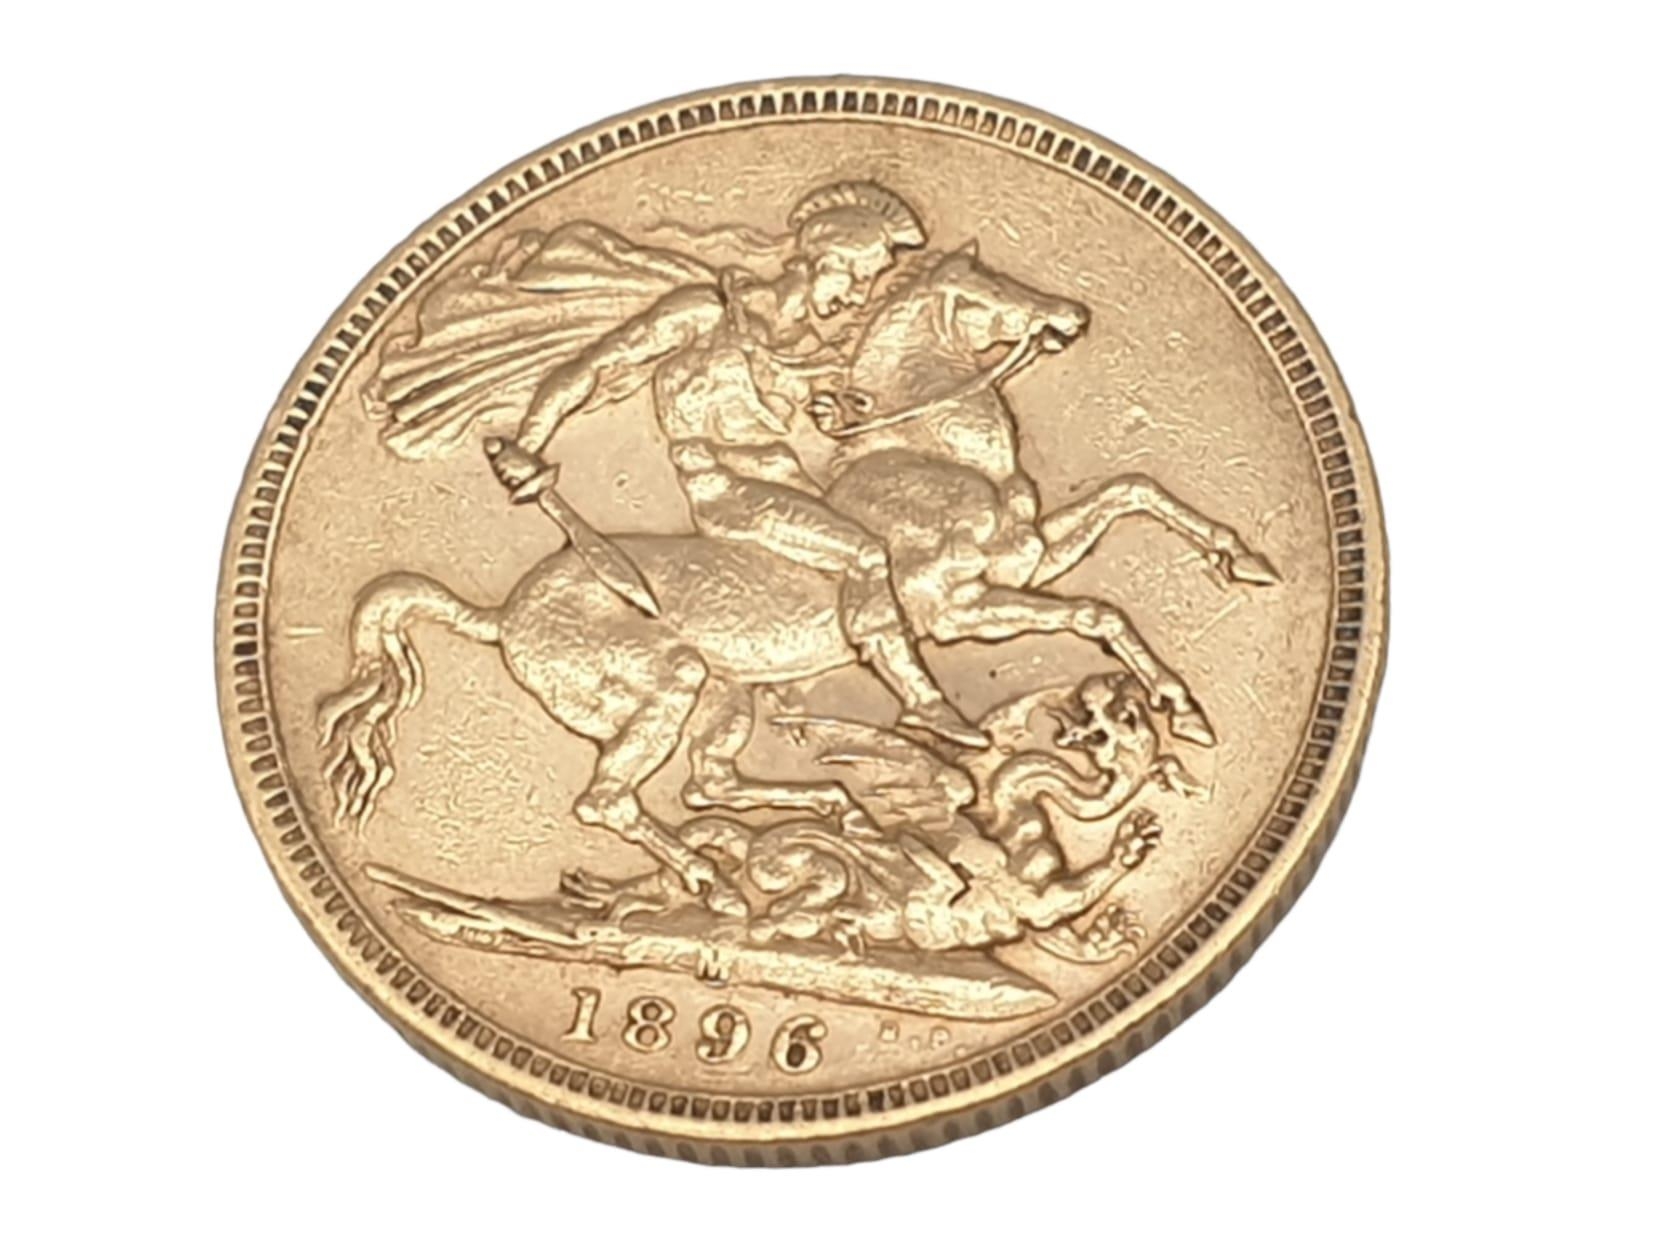 An 1896 Queen Victoria 22K Gold Full Sovereign Coin. Very Fine Condition but please see photos.